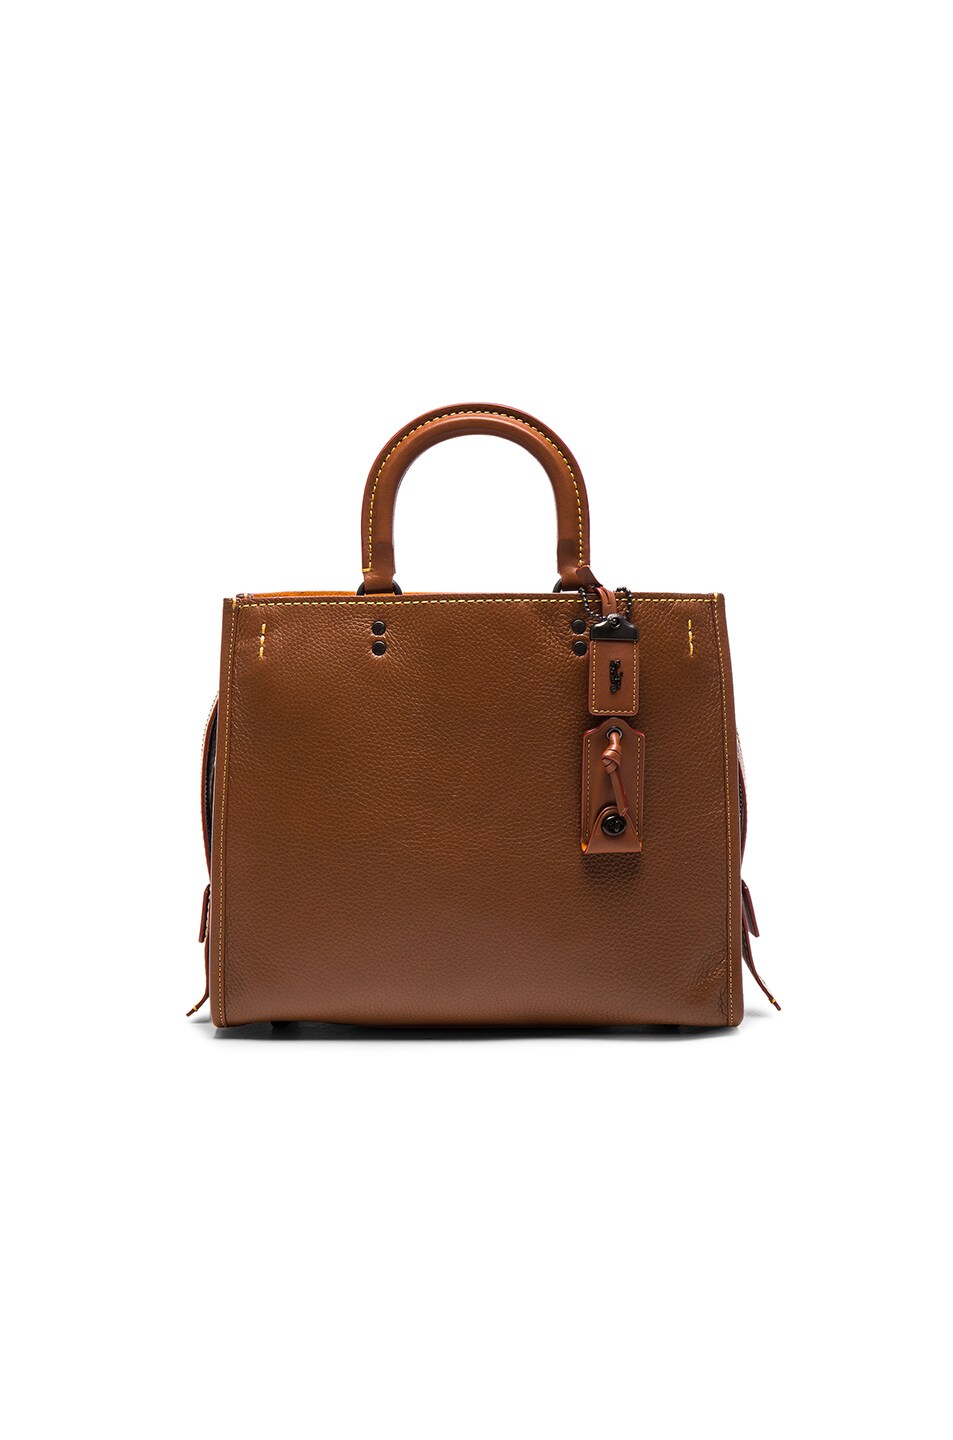 Image 1 of Coach Rogue Bag in Saddle